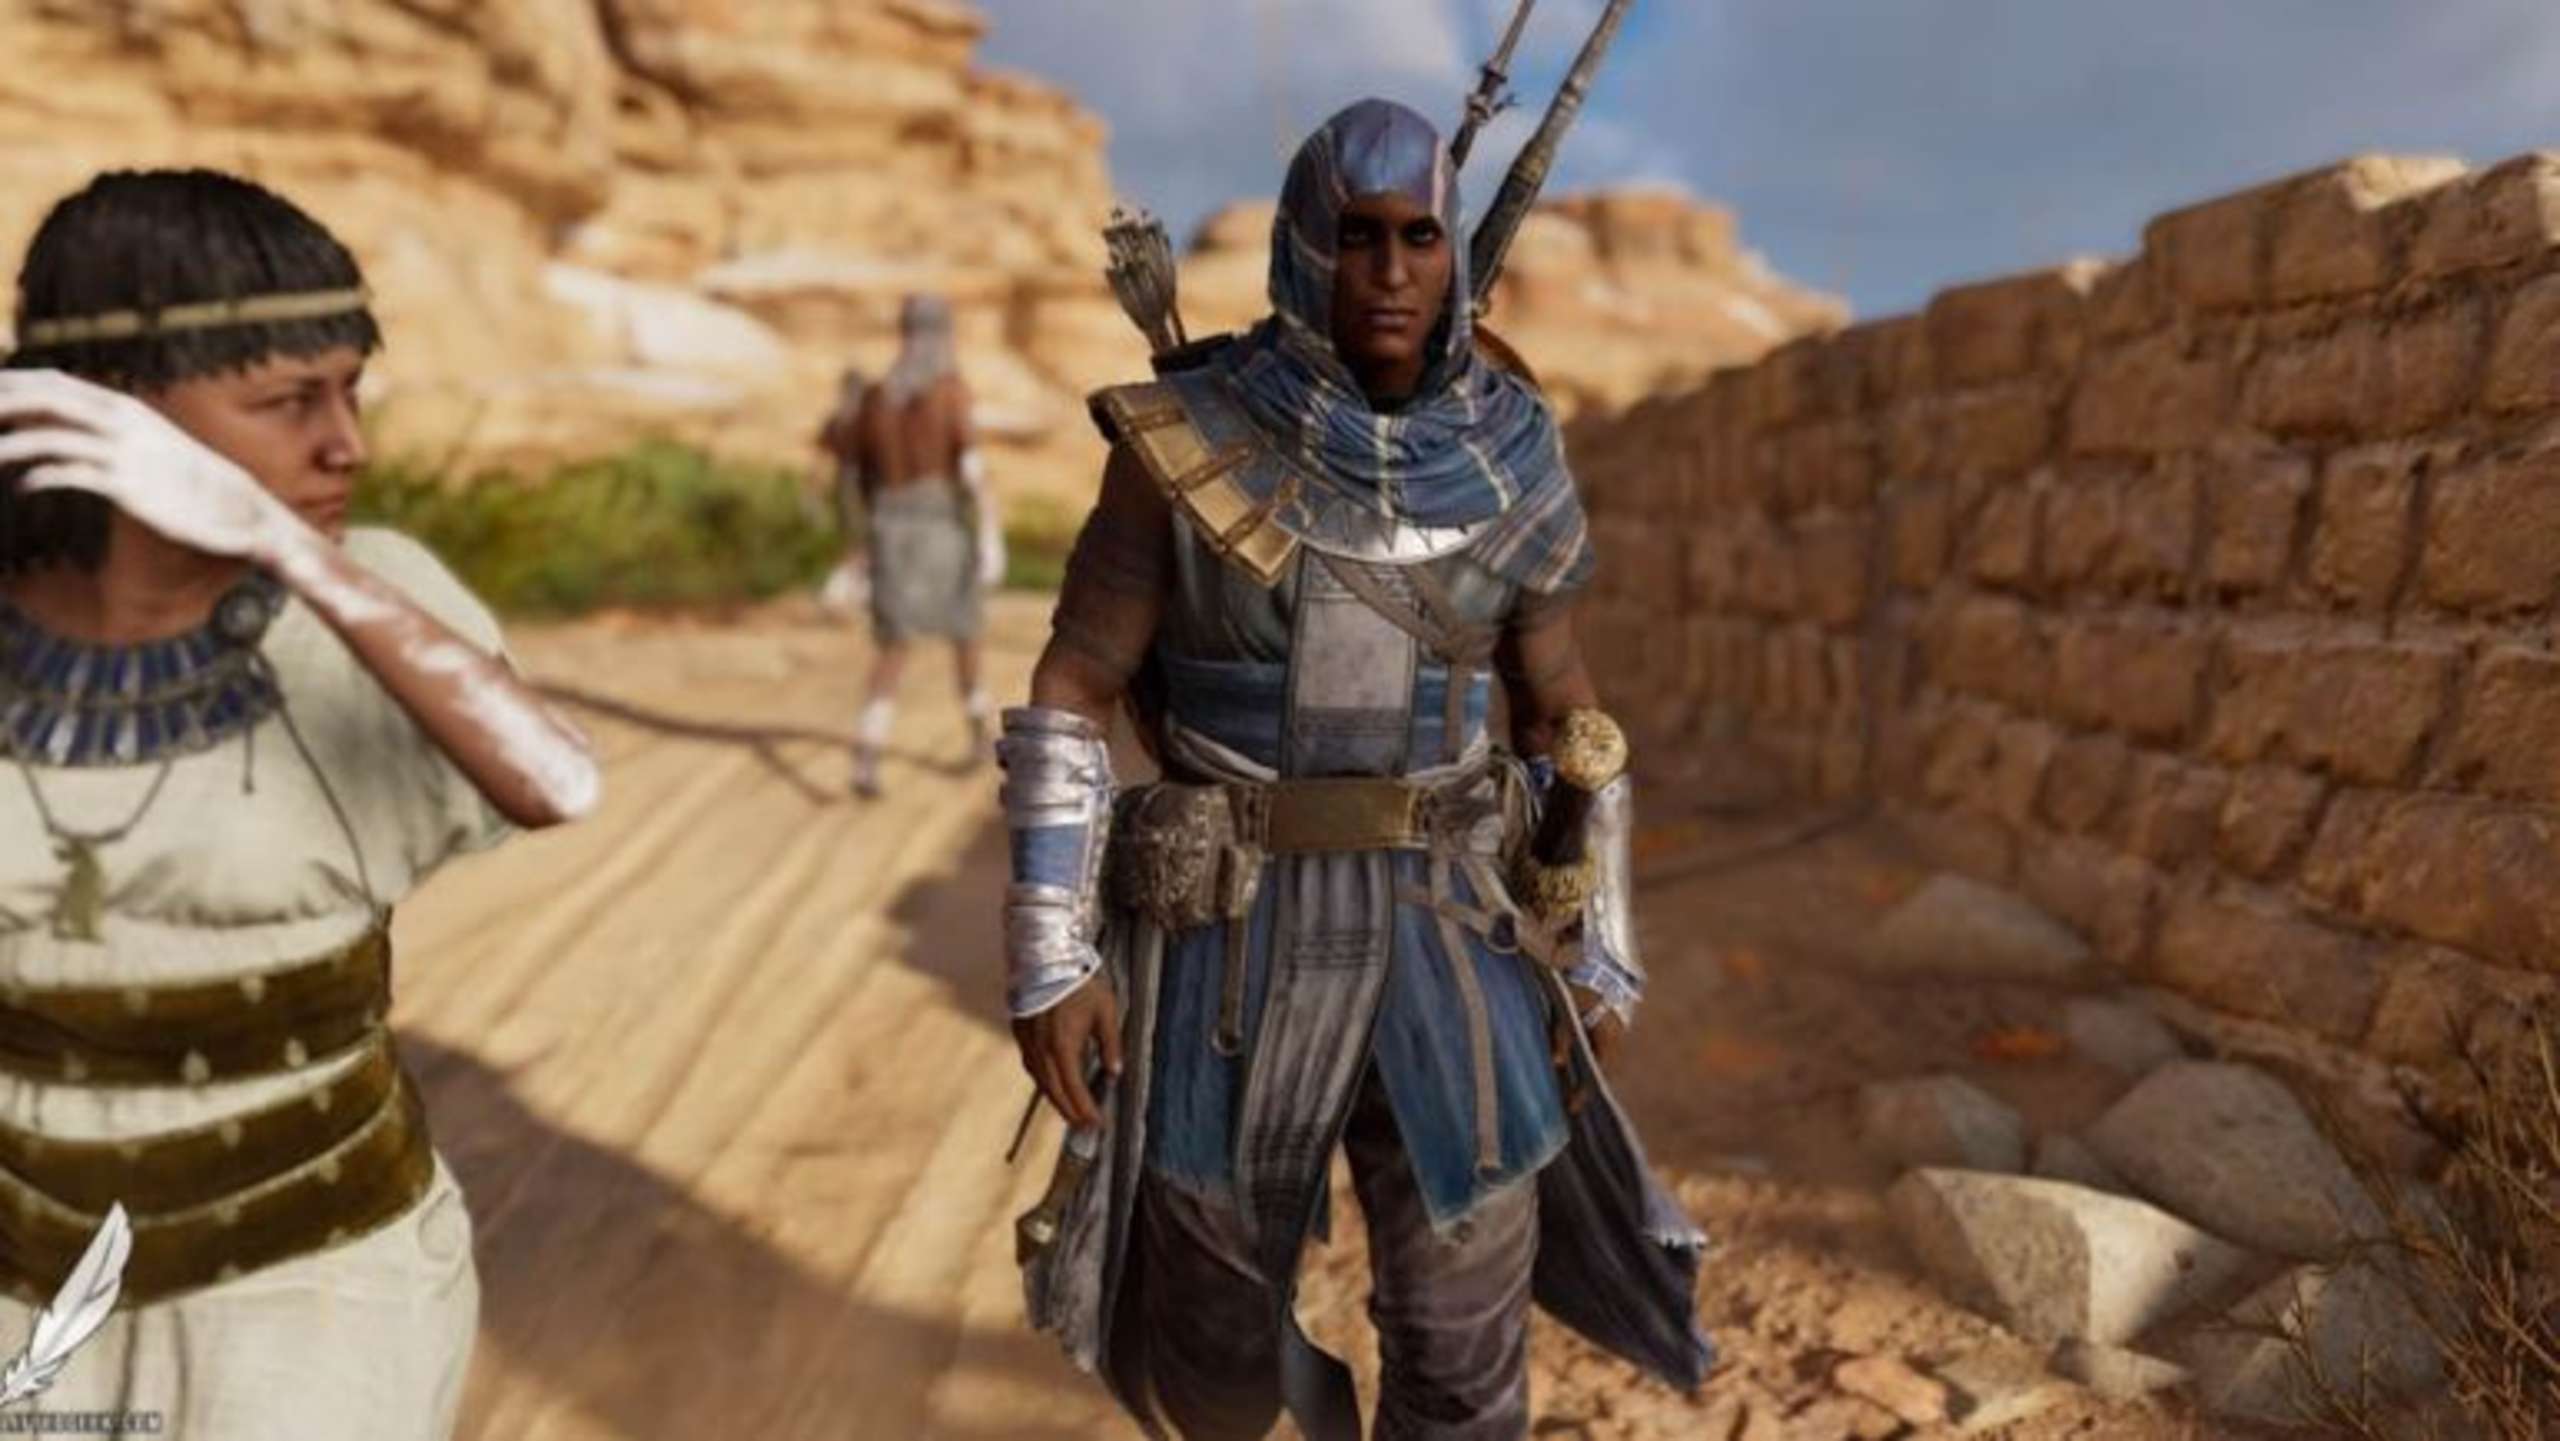 This Assassin’s Creed Origins Cosplay Is Incredible, Featuring The Gold Mask And Winged Shield That Were Integral To Bayek’s Servant Of Amun Armor